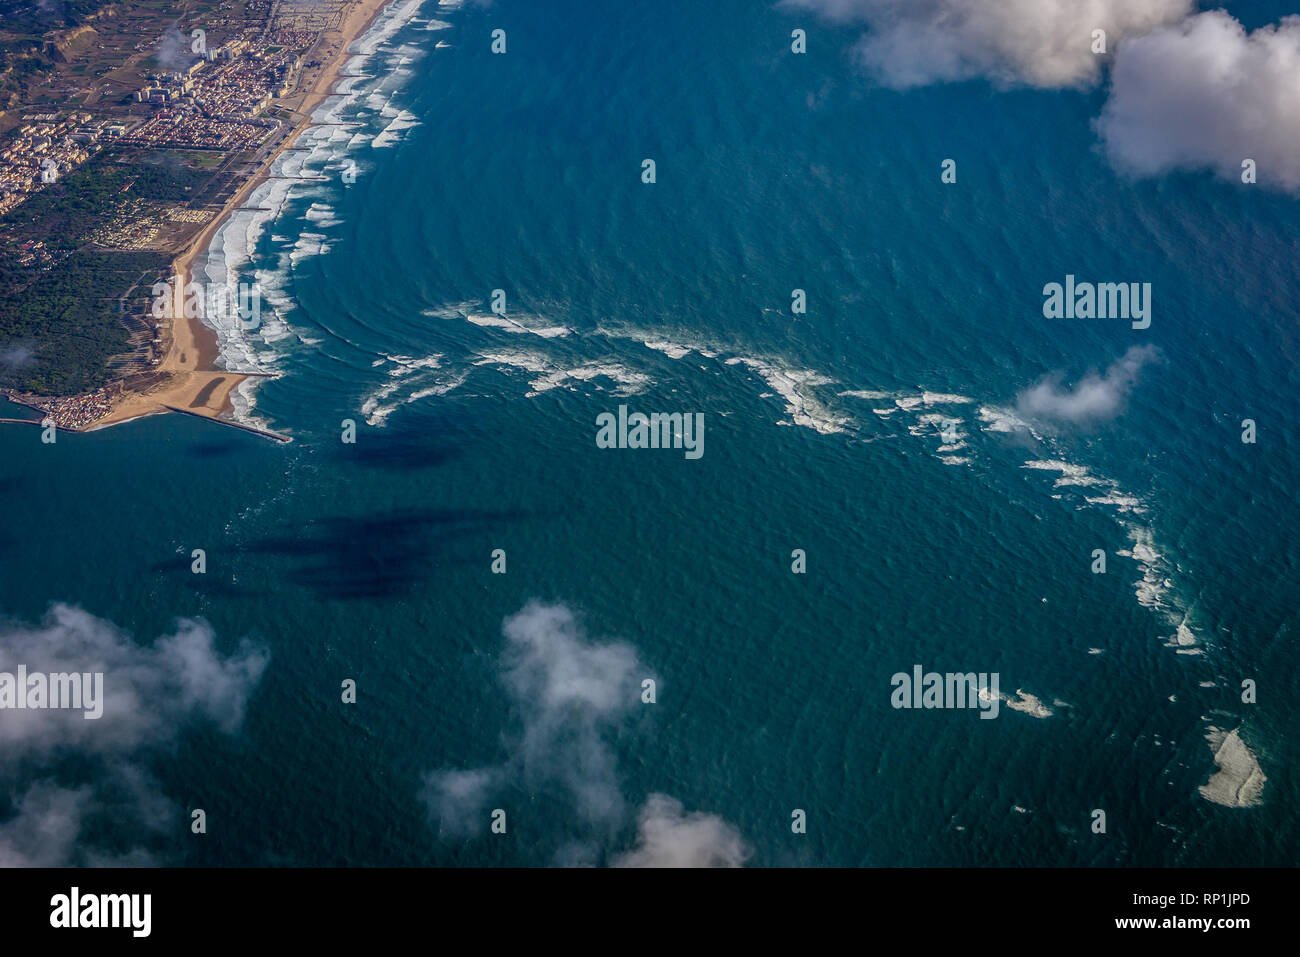 View from plane window on a Tagus River empties into the Atlantic Ocean near Lisbon, Portugal Stock Photo